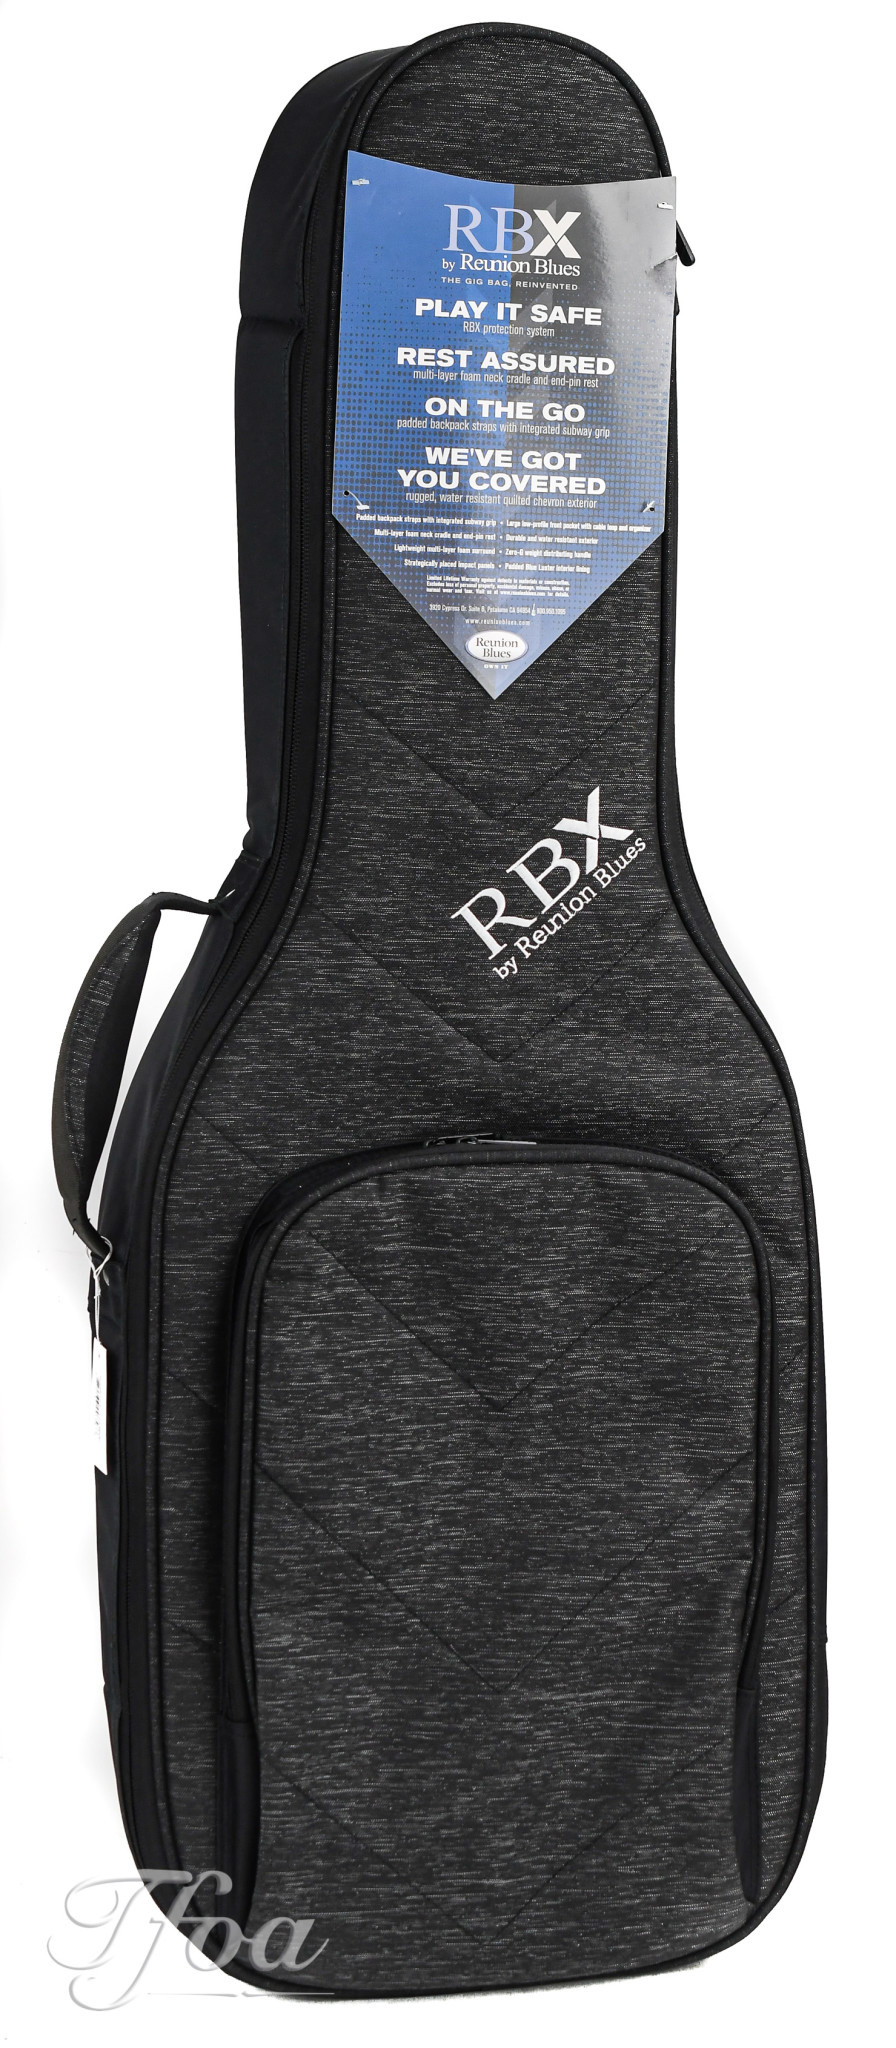 Reunion Blues Rbx Oxford Electric Guitar Gig Bag The Fellowshop Of Acoustics - multi rbx